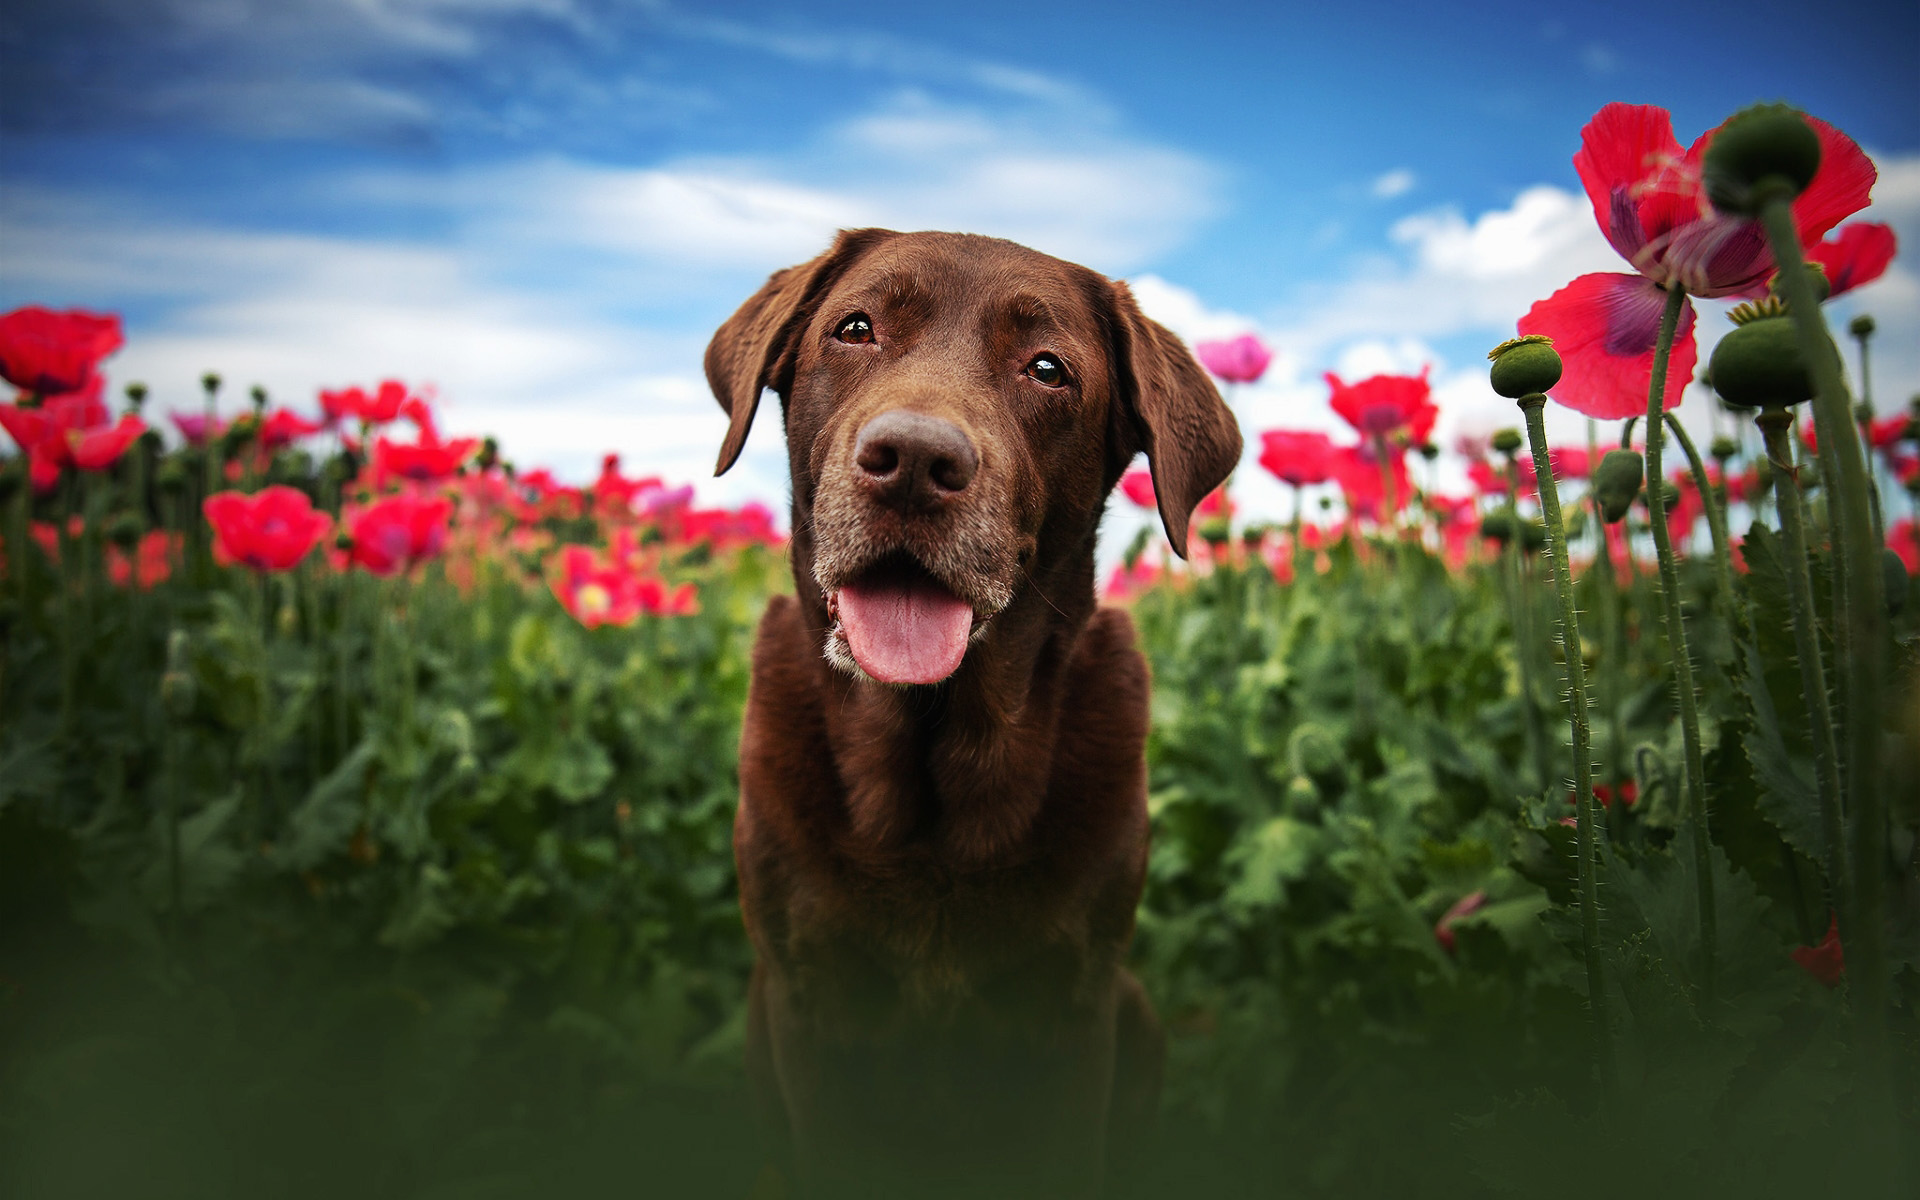 Download wallpaper Chesapeake Bay Retriever, summer, dogs, brown dog, flowers, bokeh, pets, cute animals, Chesapeake Bay Retriever Dog for desktop with resolution 1920x1200. High Quality HD picture wallpaper